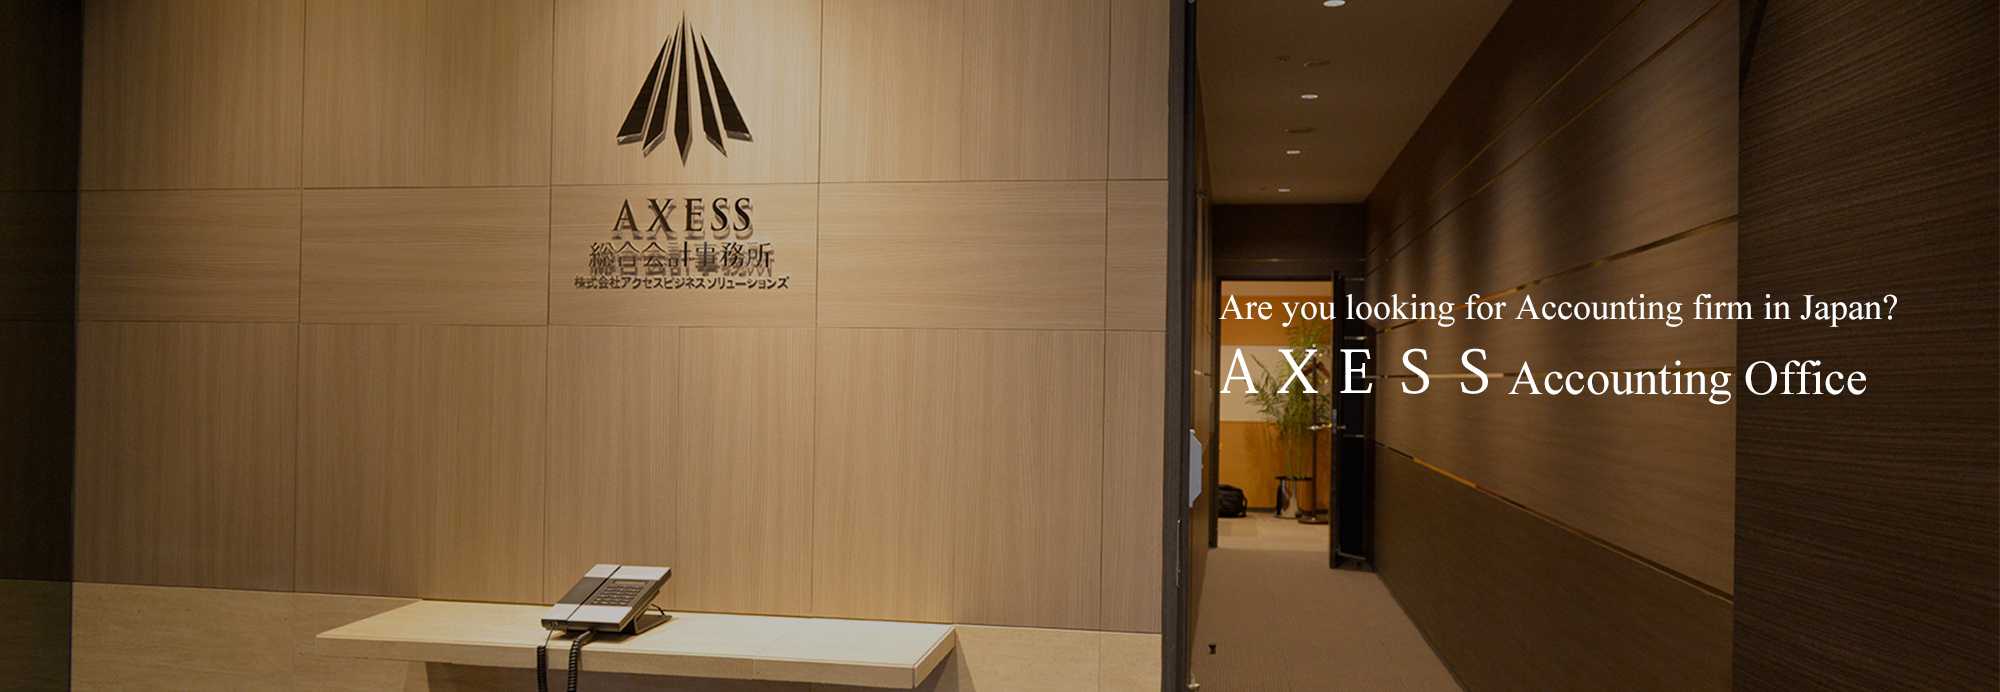 Axess accounting office